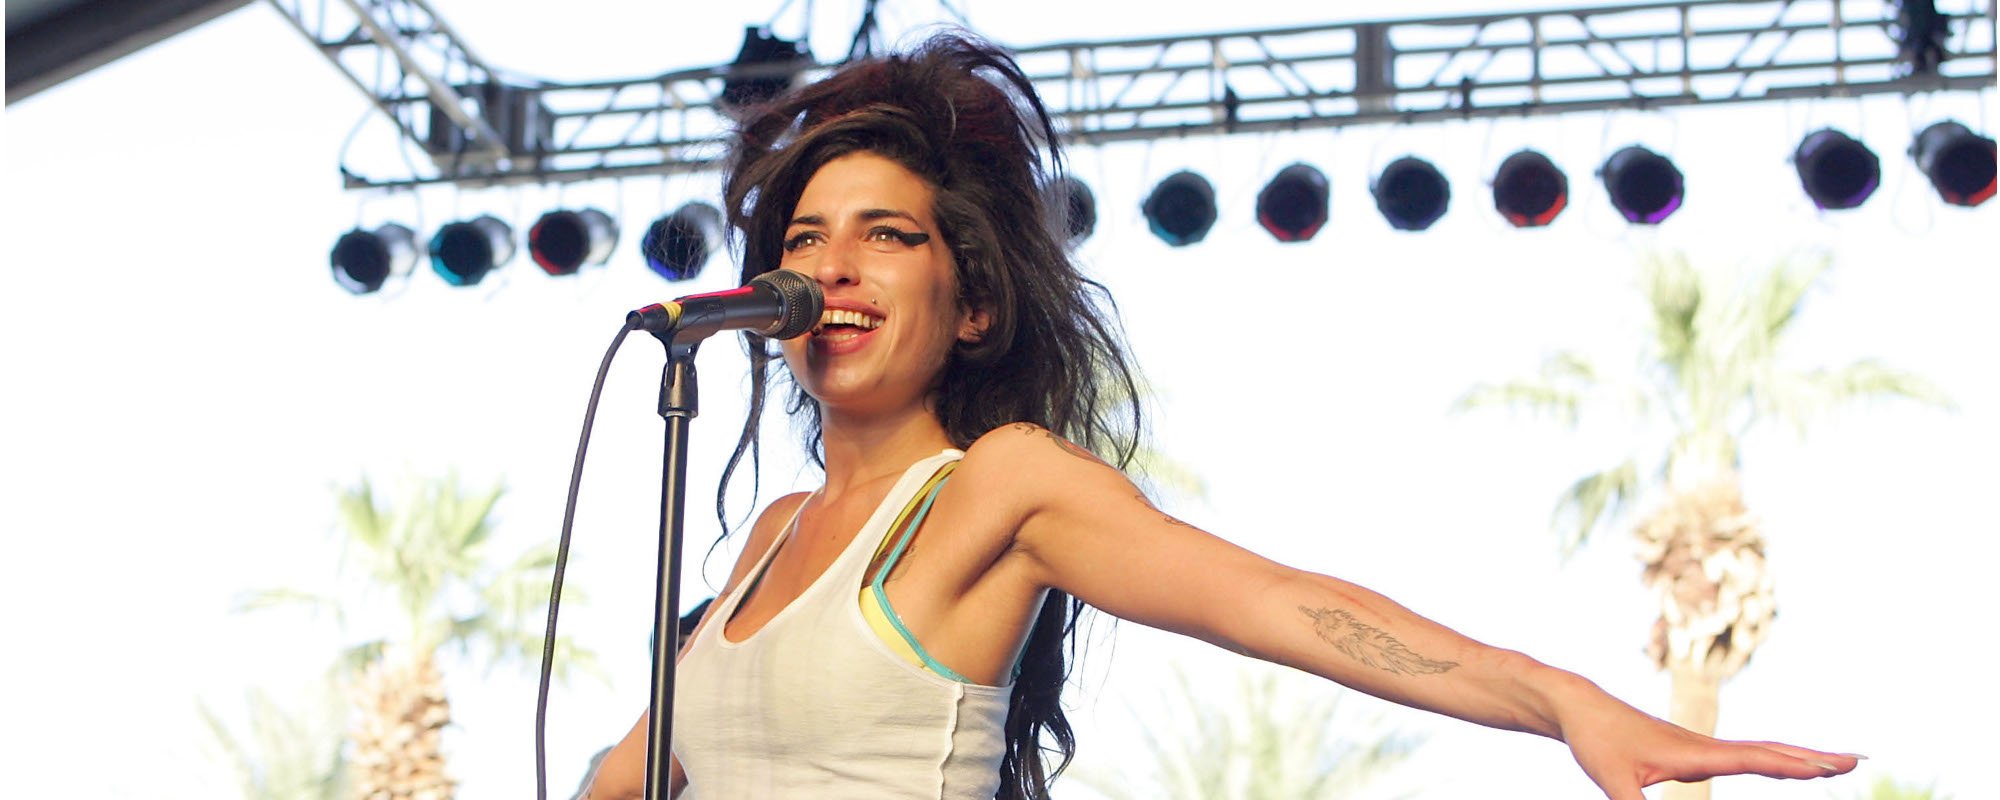 The Gut-Wrenching Story Behind the Death of Amy Winehouse